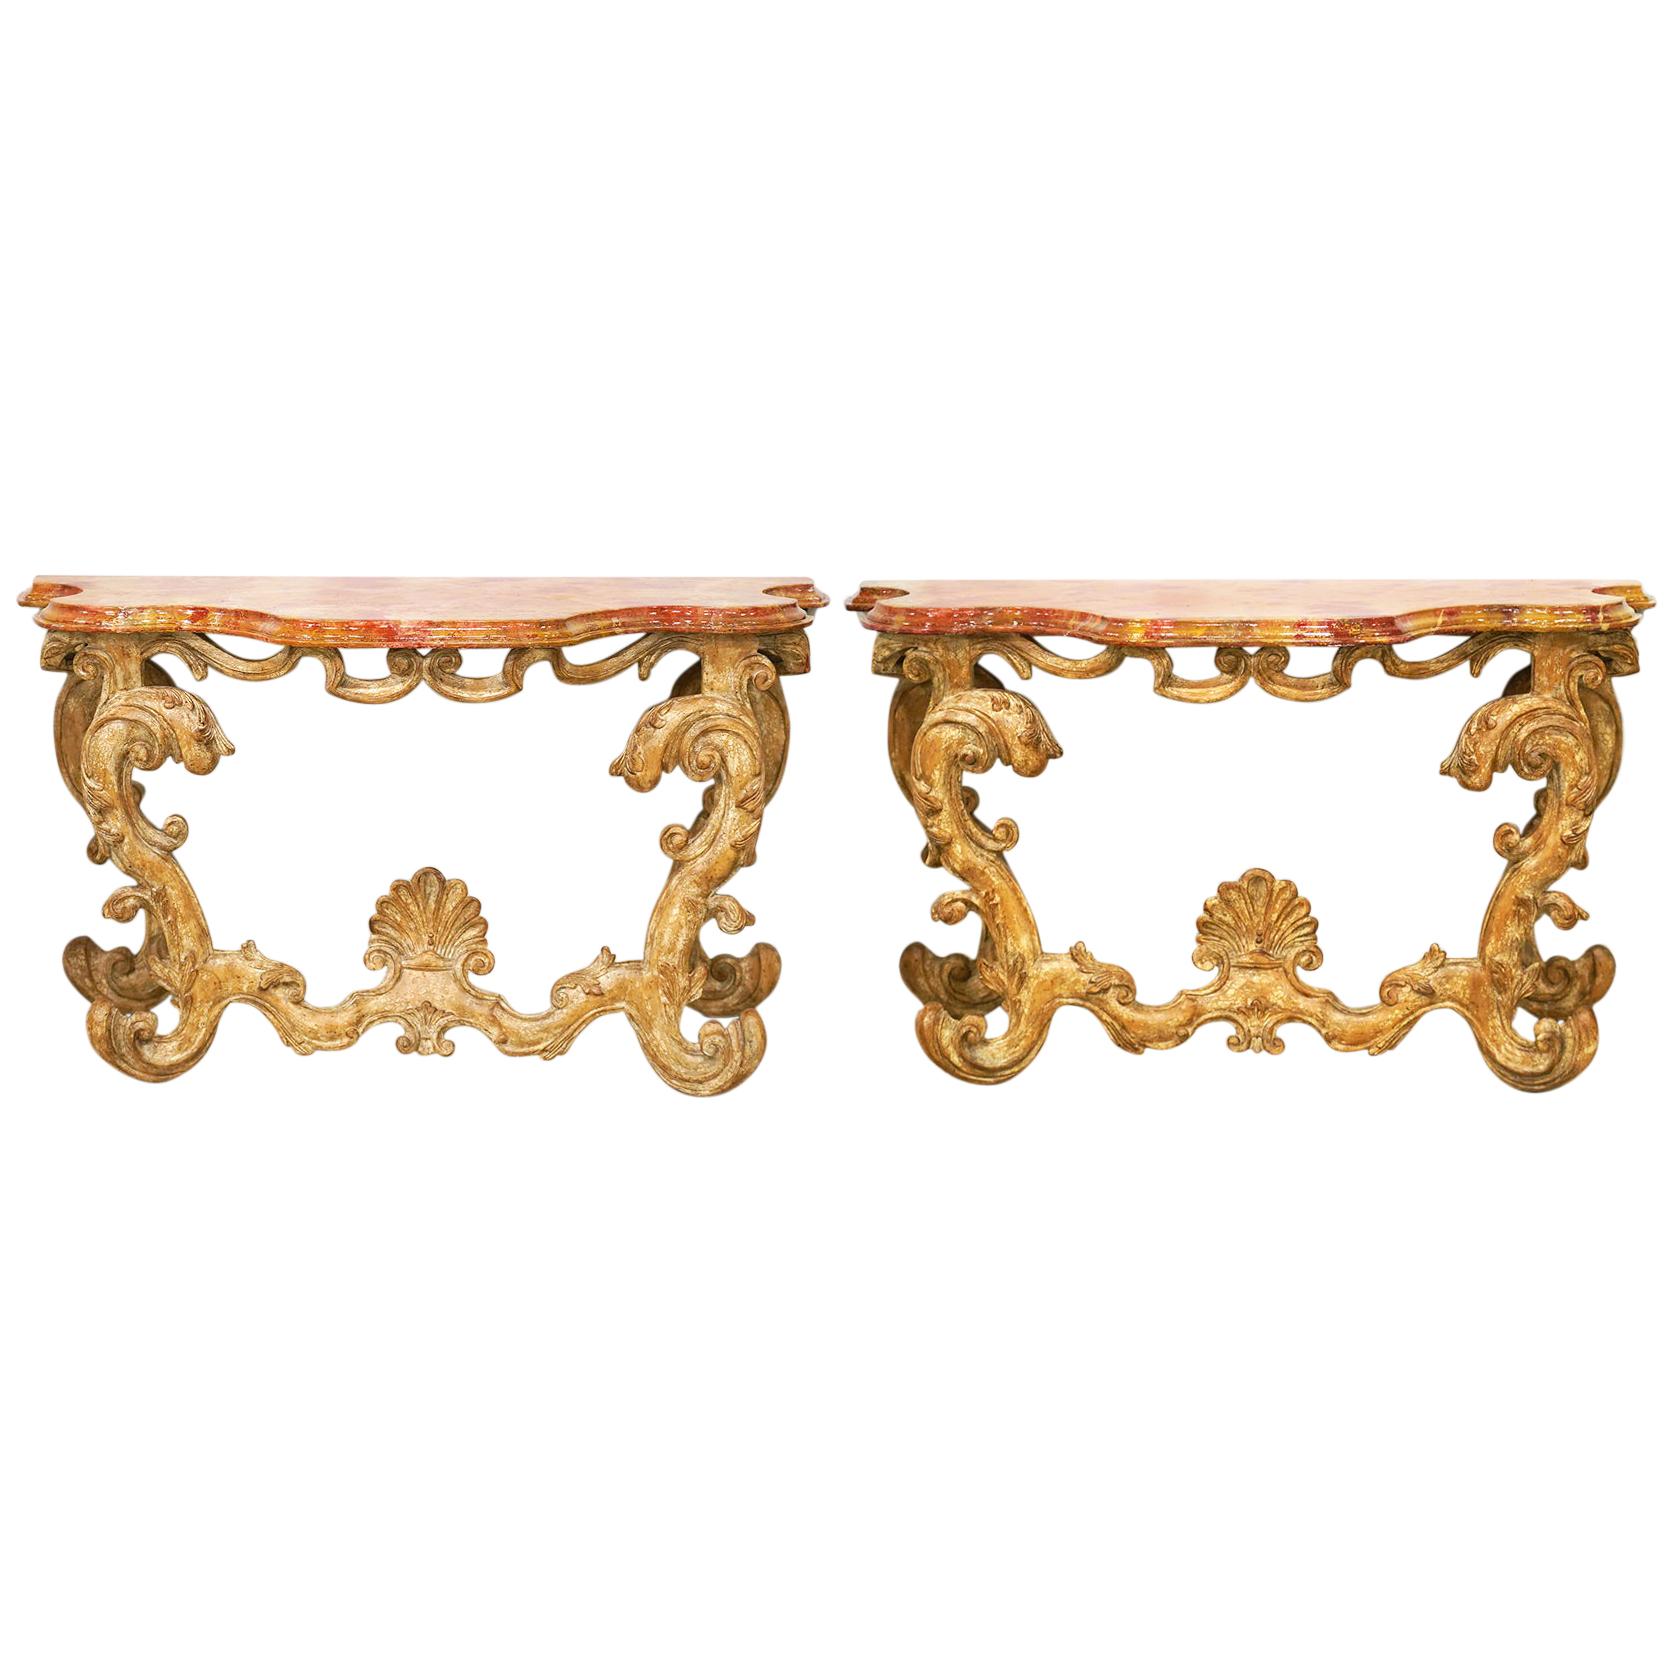 Pair of Italian Baroque Style Carved Console Tables with Marbleized Tops